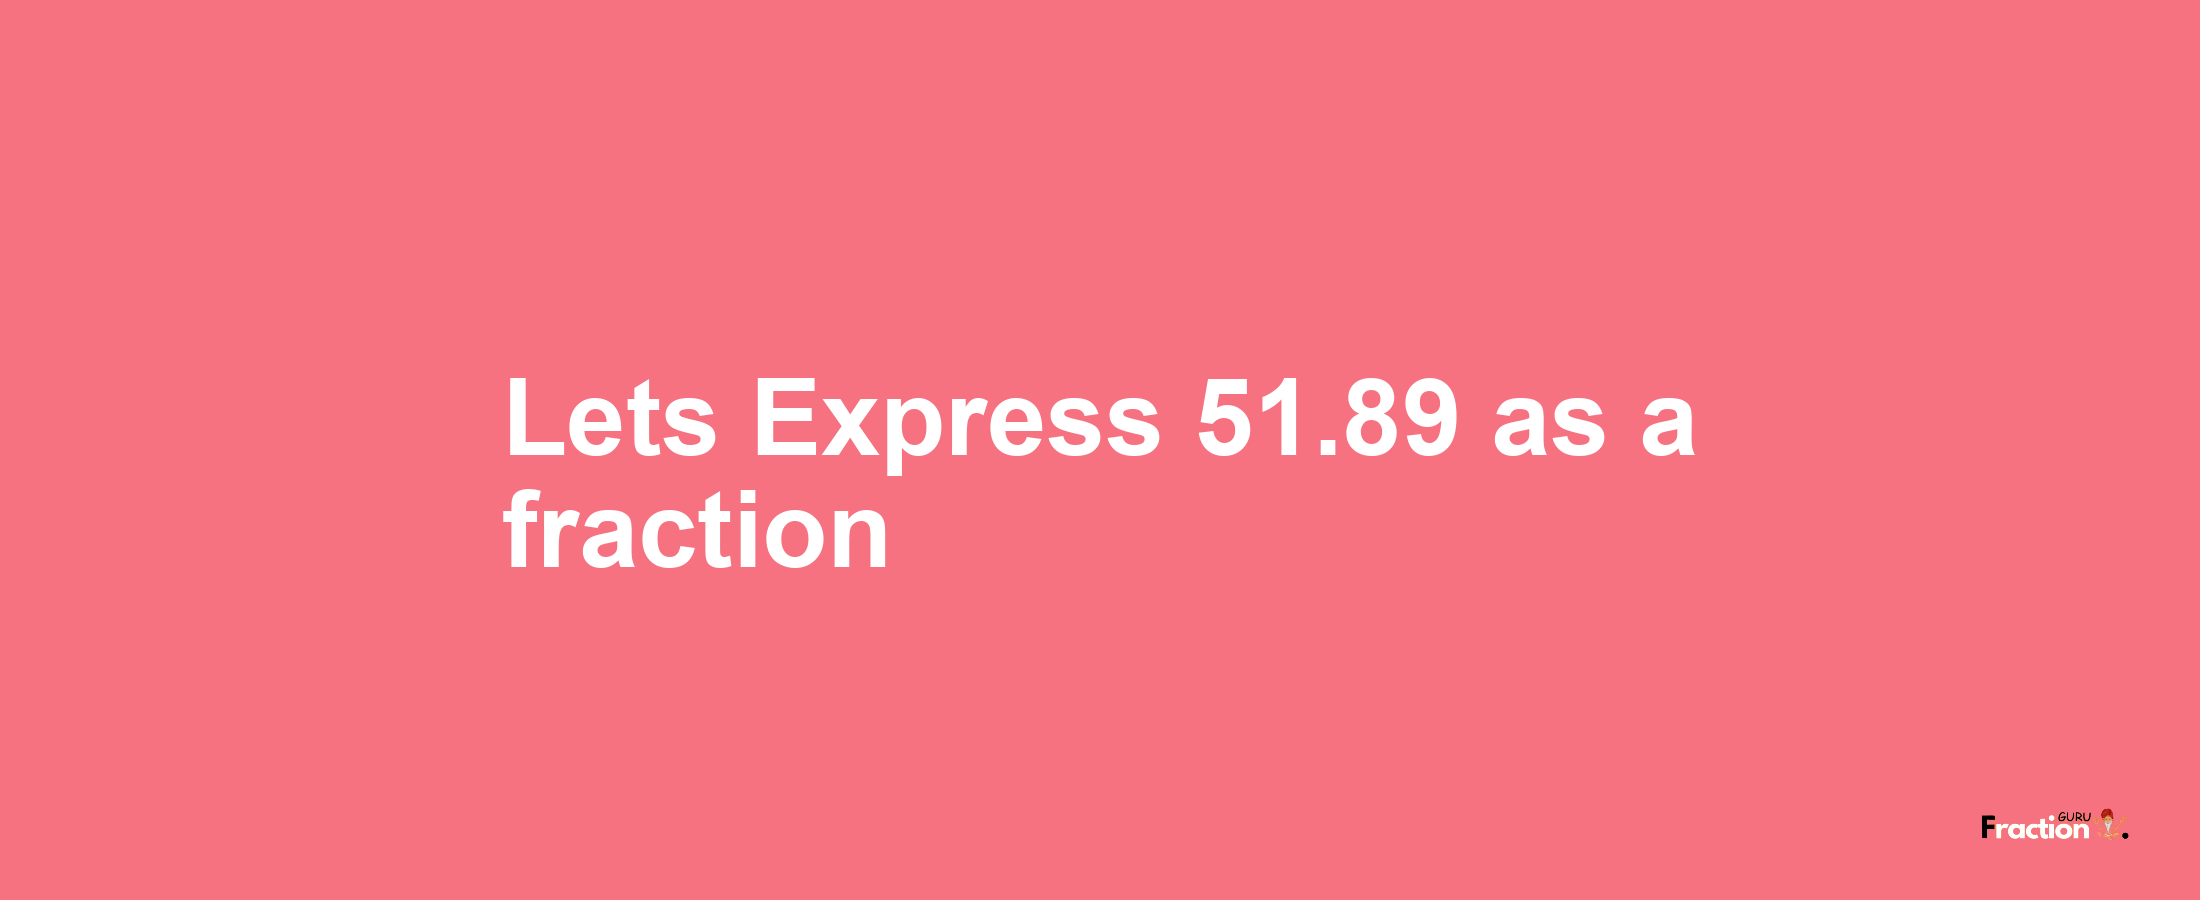 Lets Express 51.89 as afraction